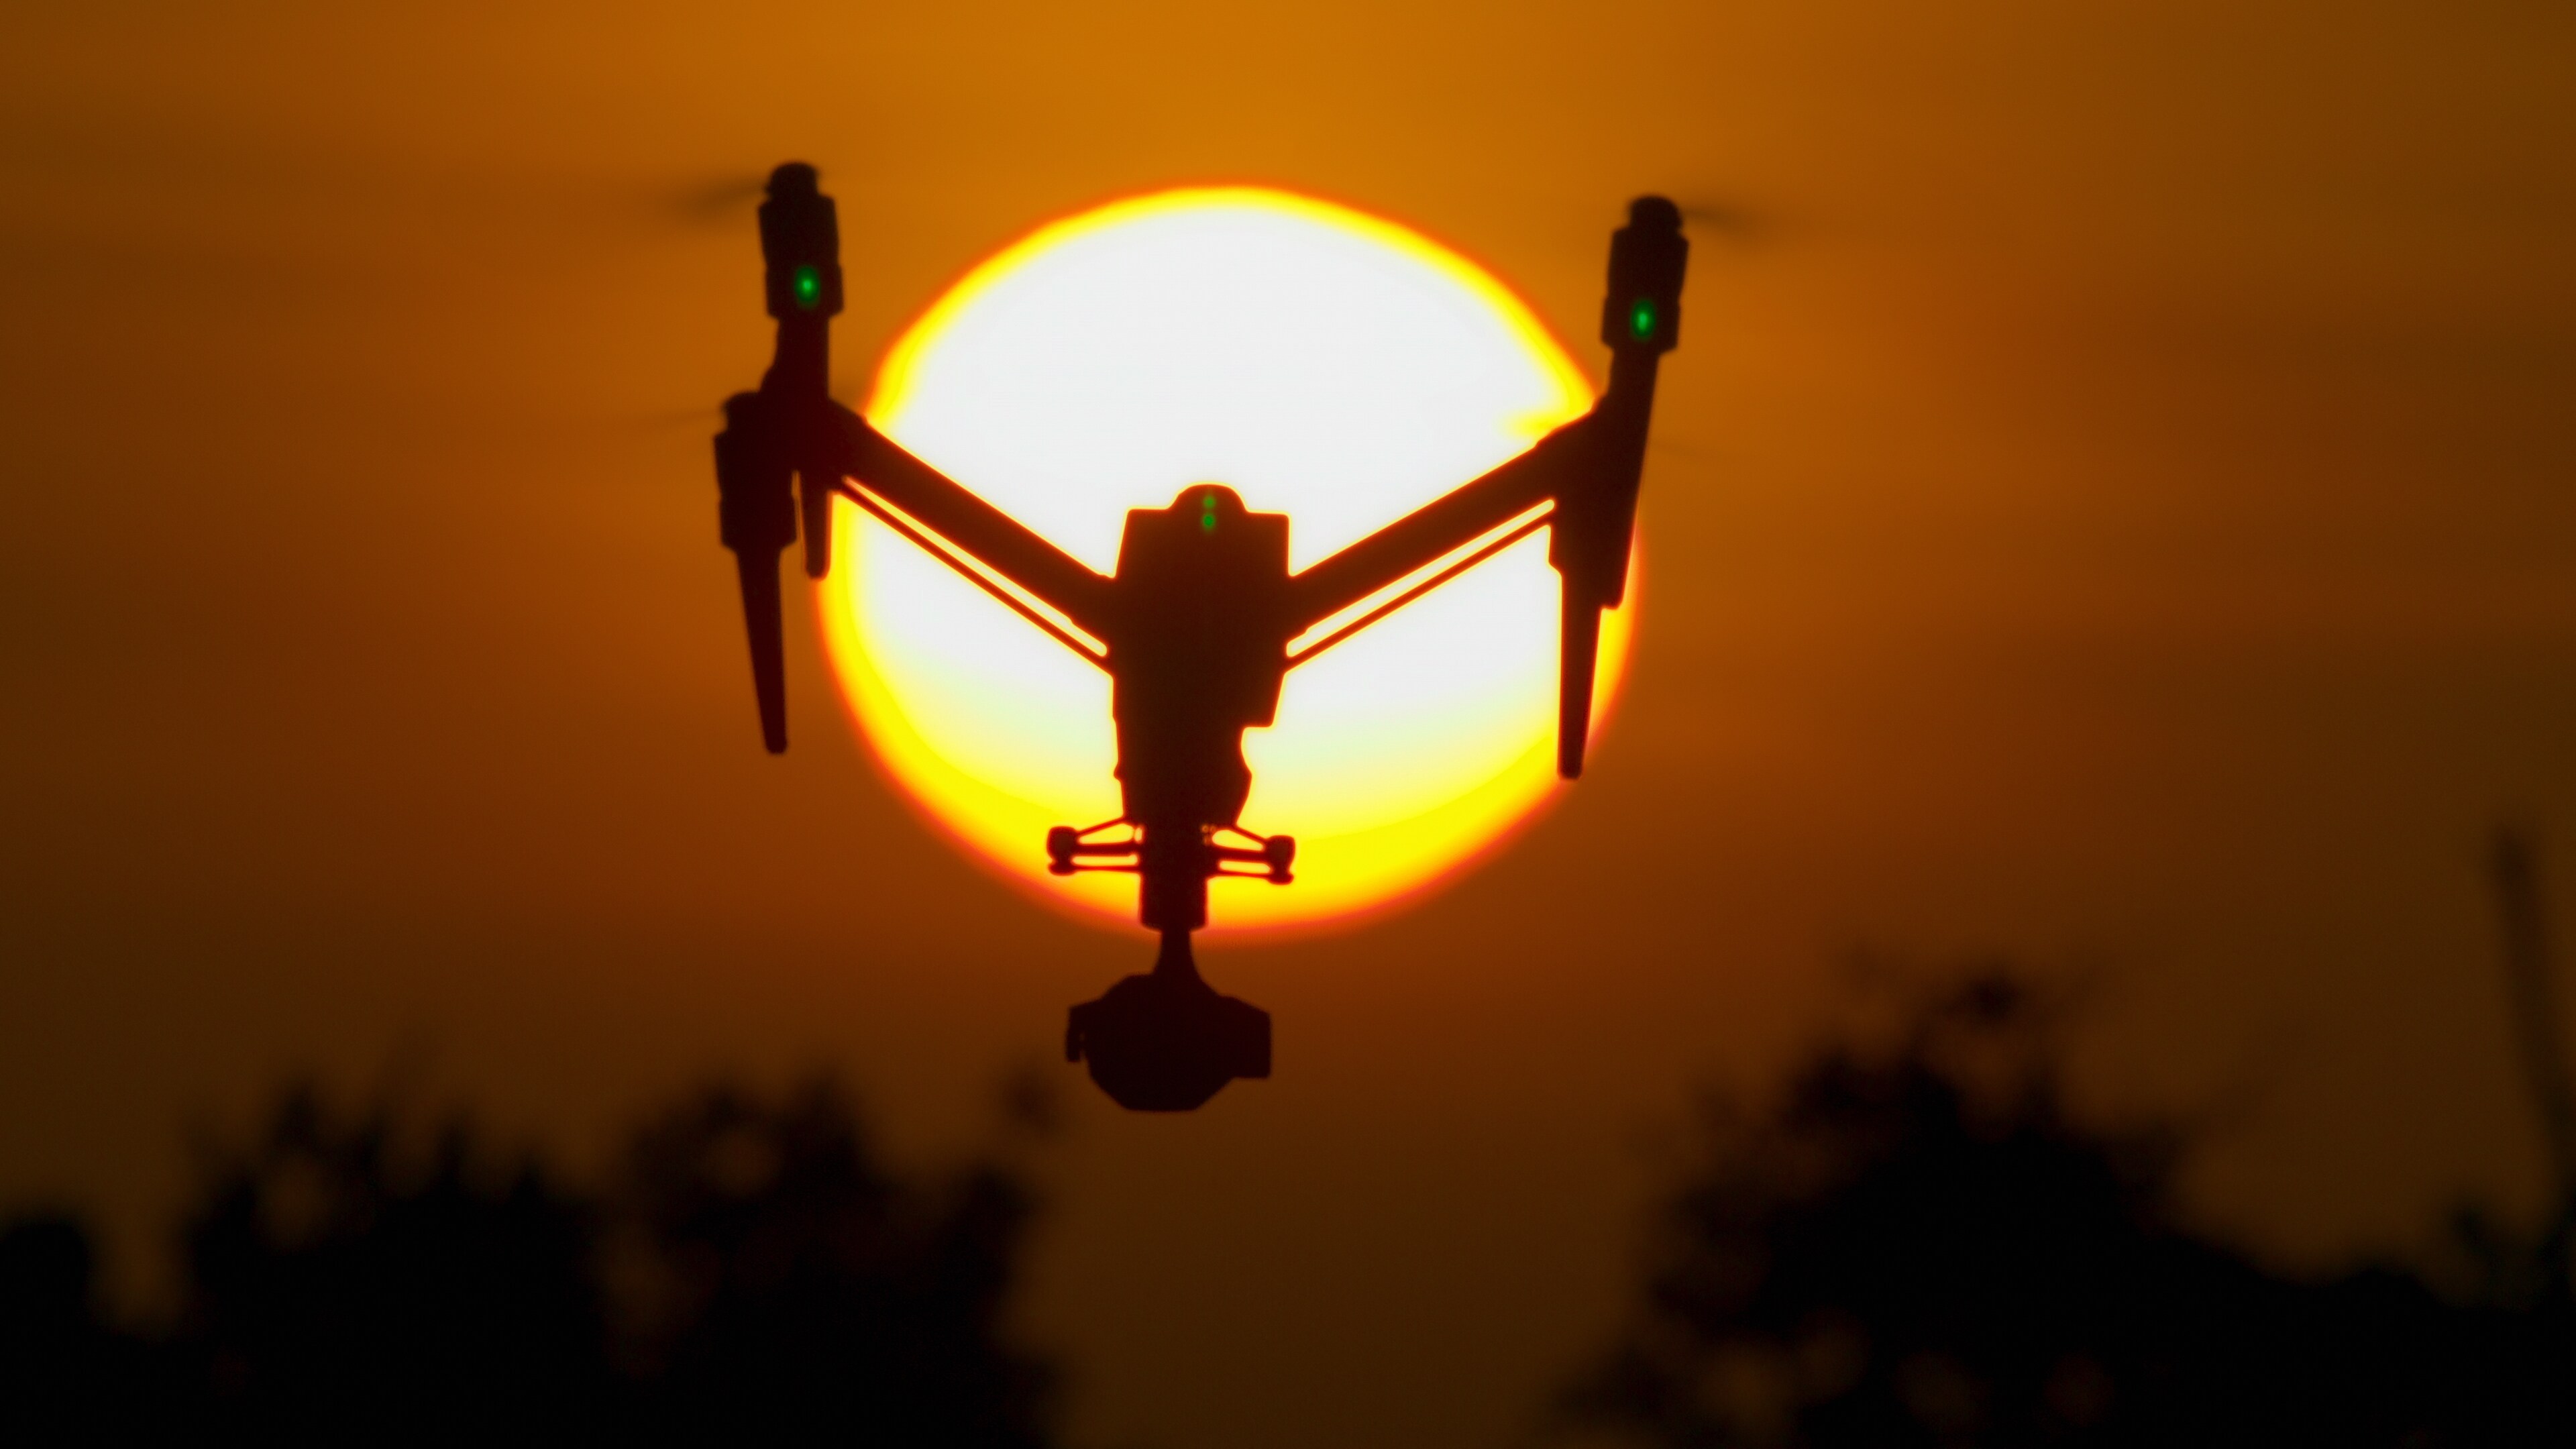 Drone flying with sunset in background. (Credit: National Geographic for Disney+)